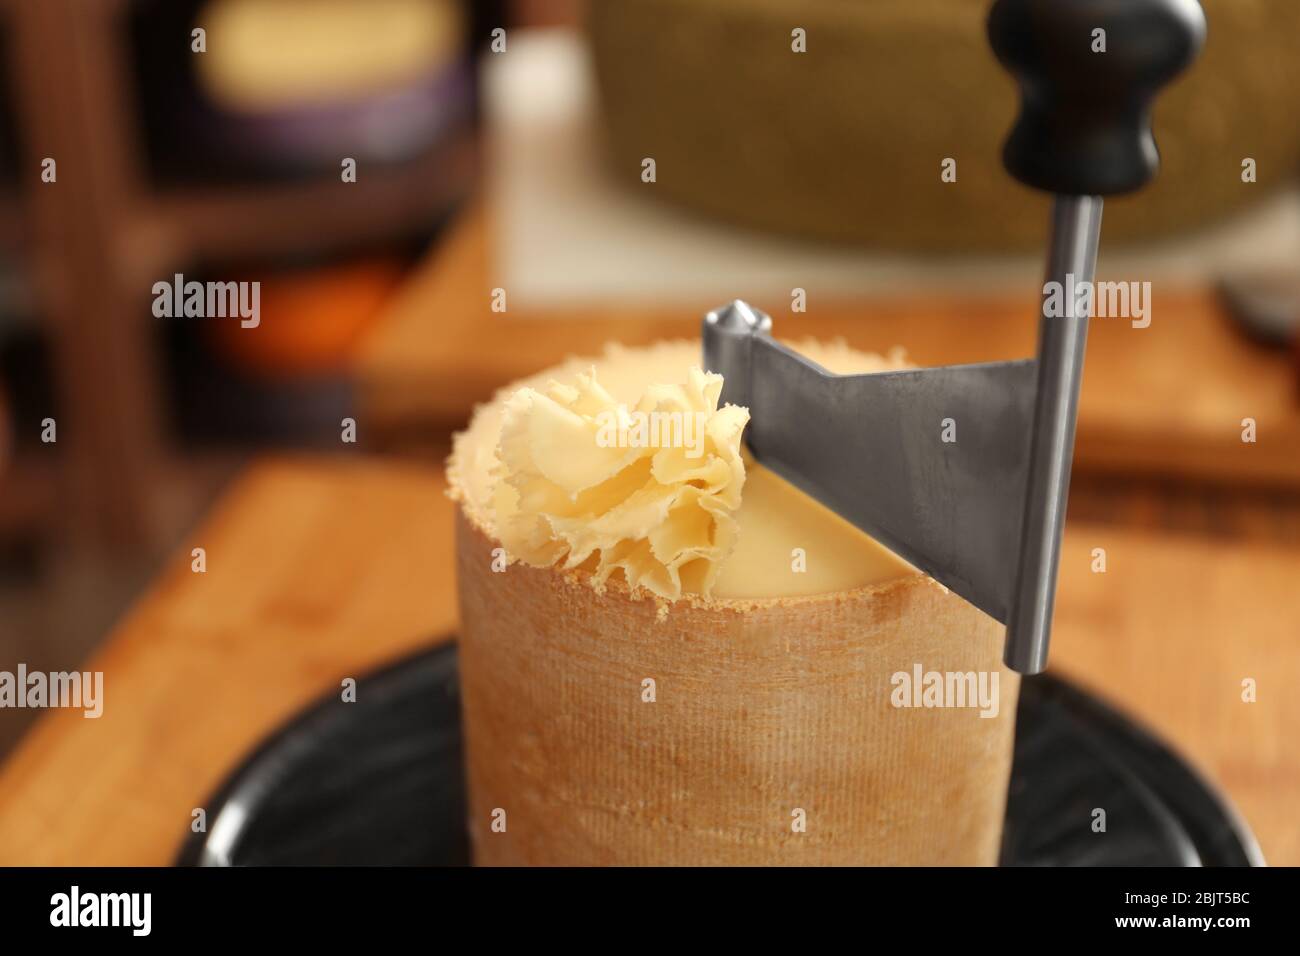 Shaving tete de moine cheese using girolle knife. Monks head. Variety of  Swiss semi-hard cheese made from cows milk Stock Photo - Alamy